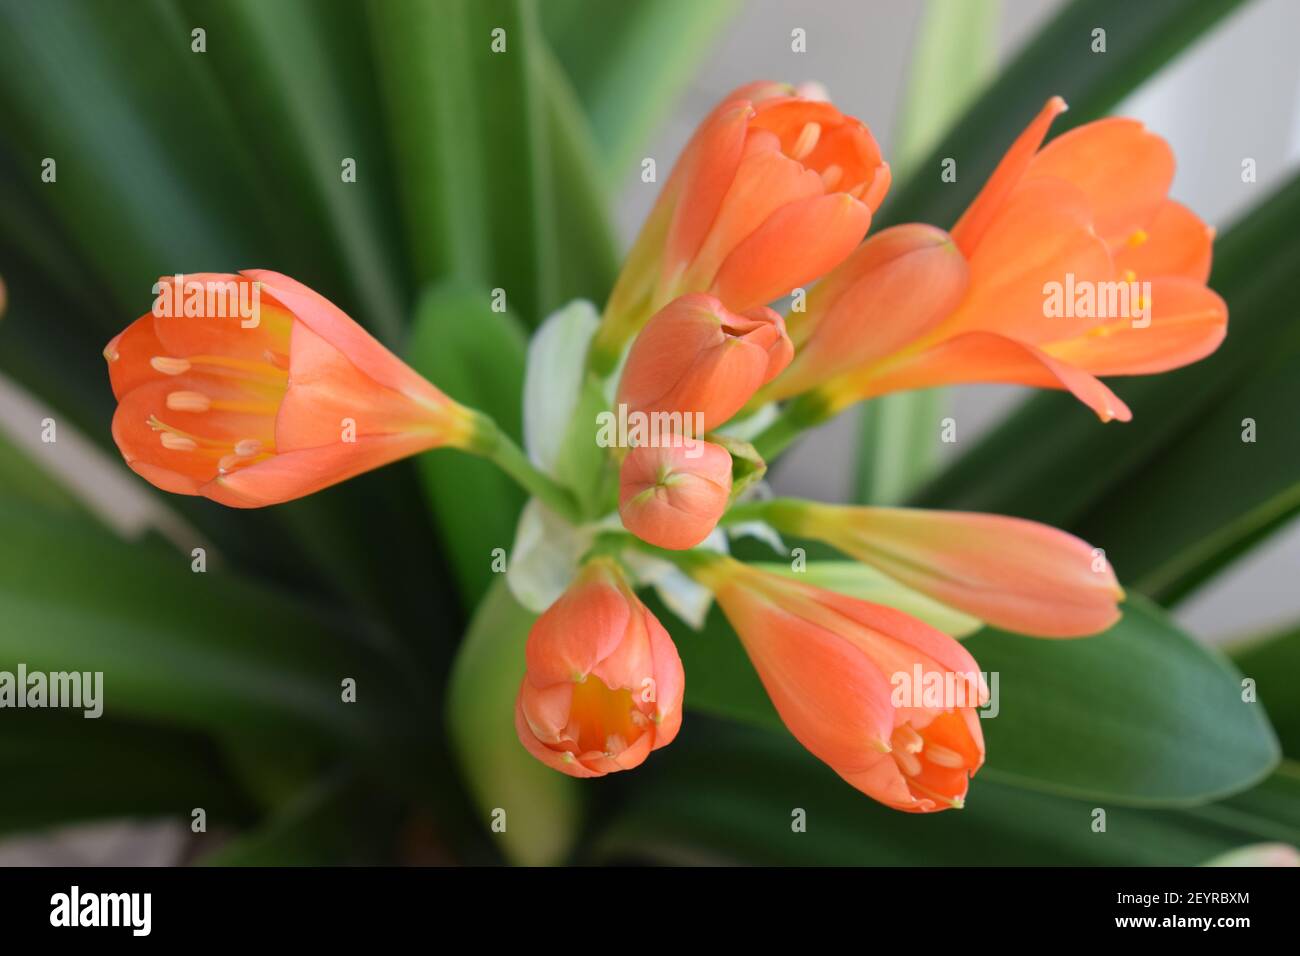 spring in the winter garden with blooming clivia Stock Photo